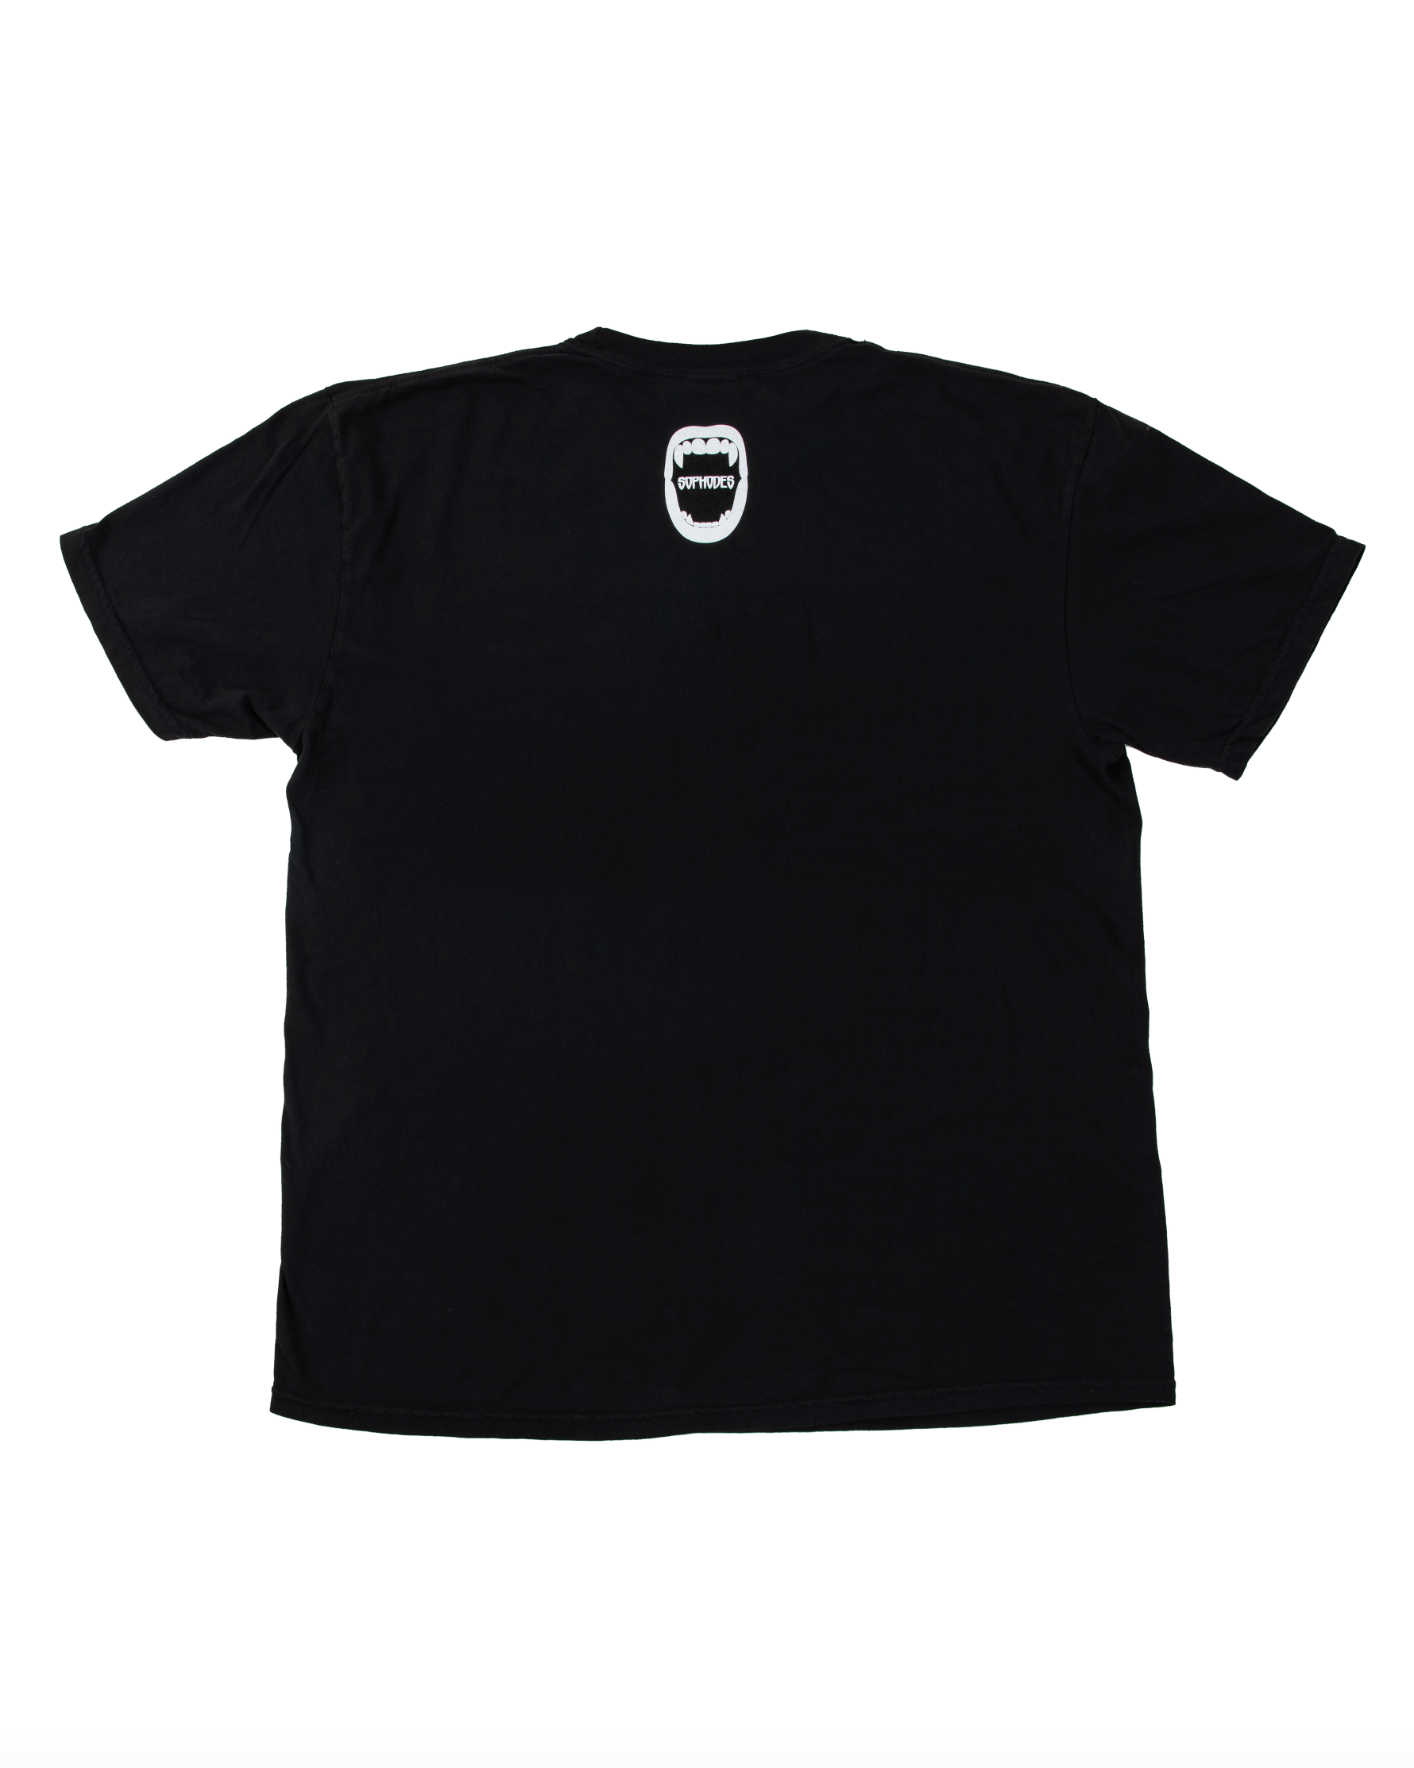 YOUR NEW FAVORITE BLACK TEE